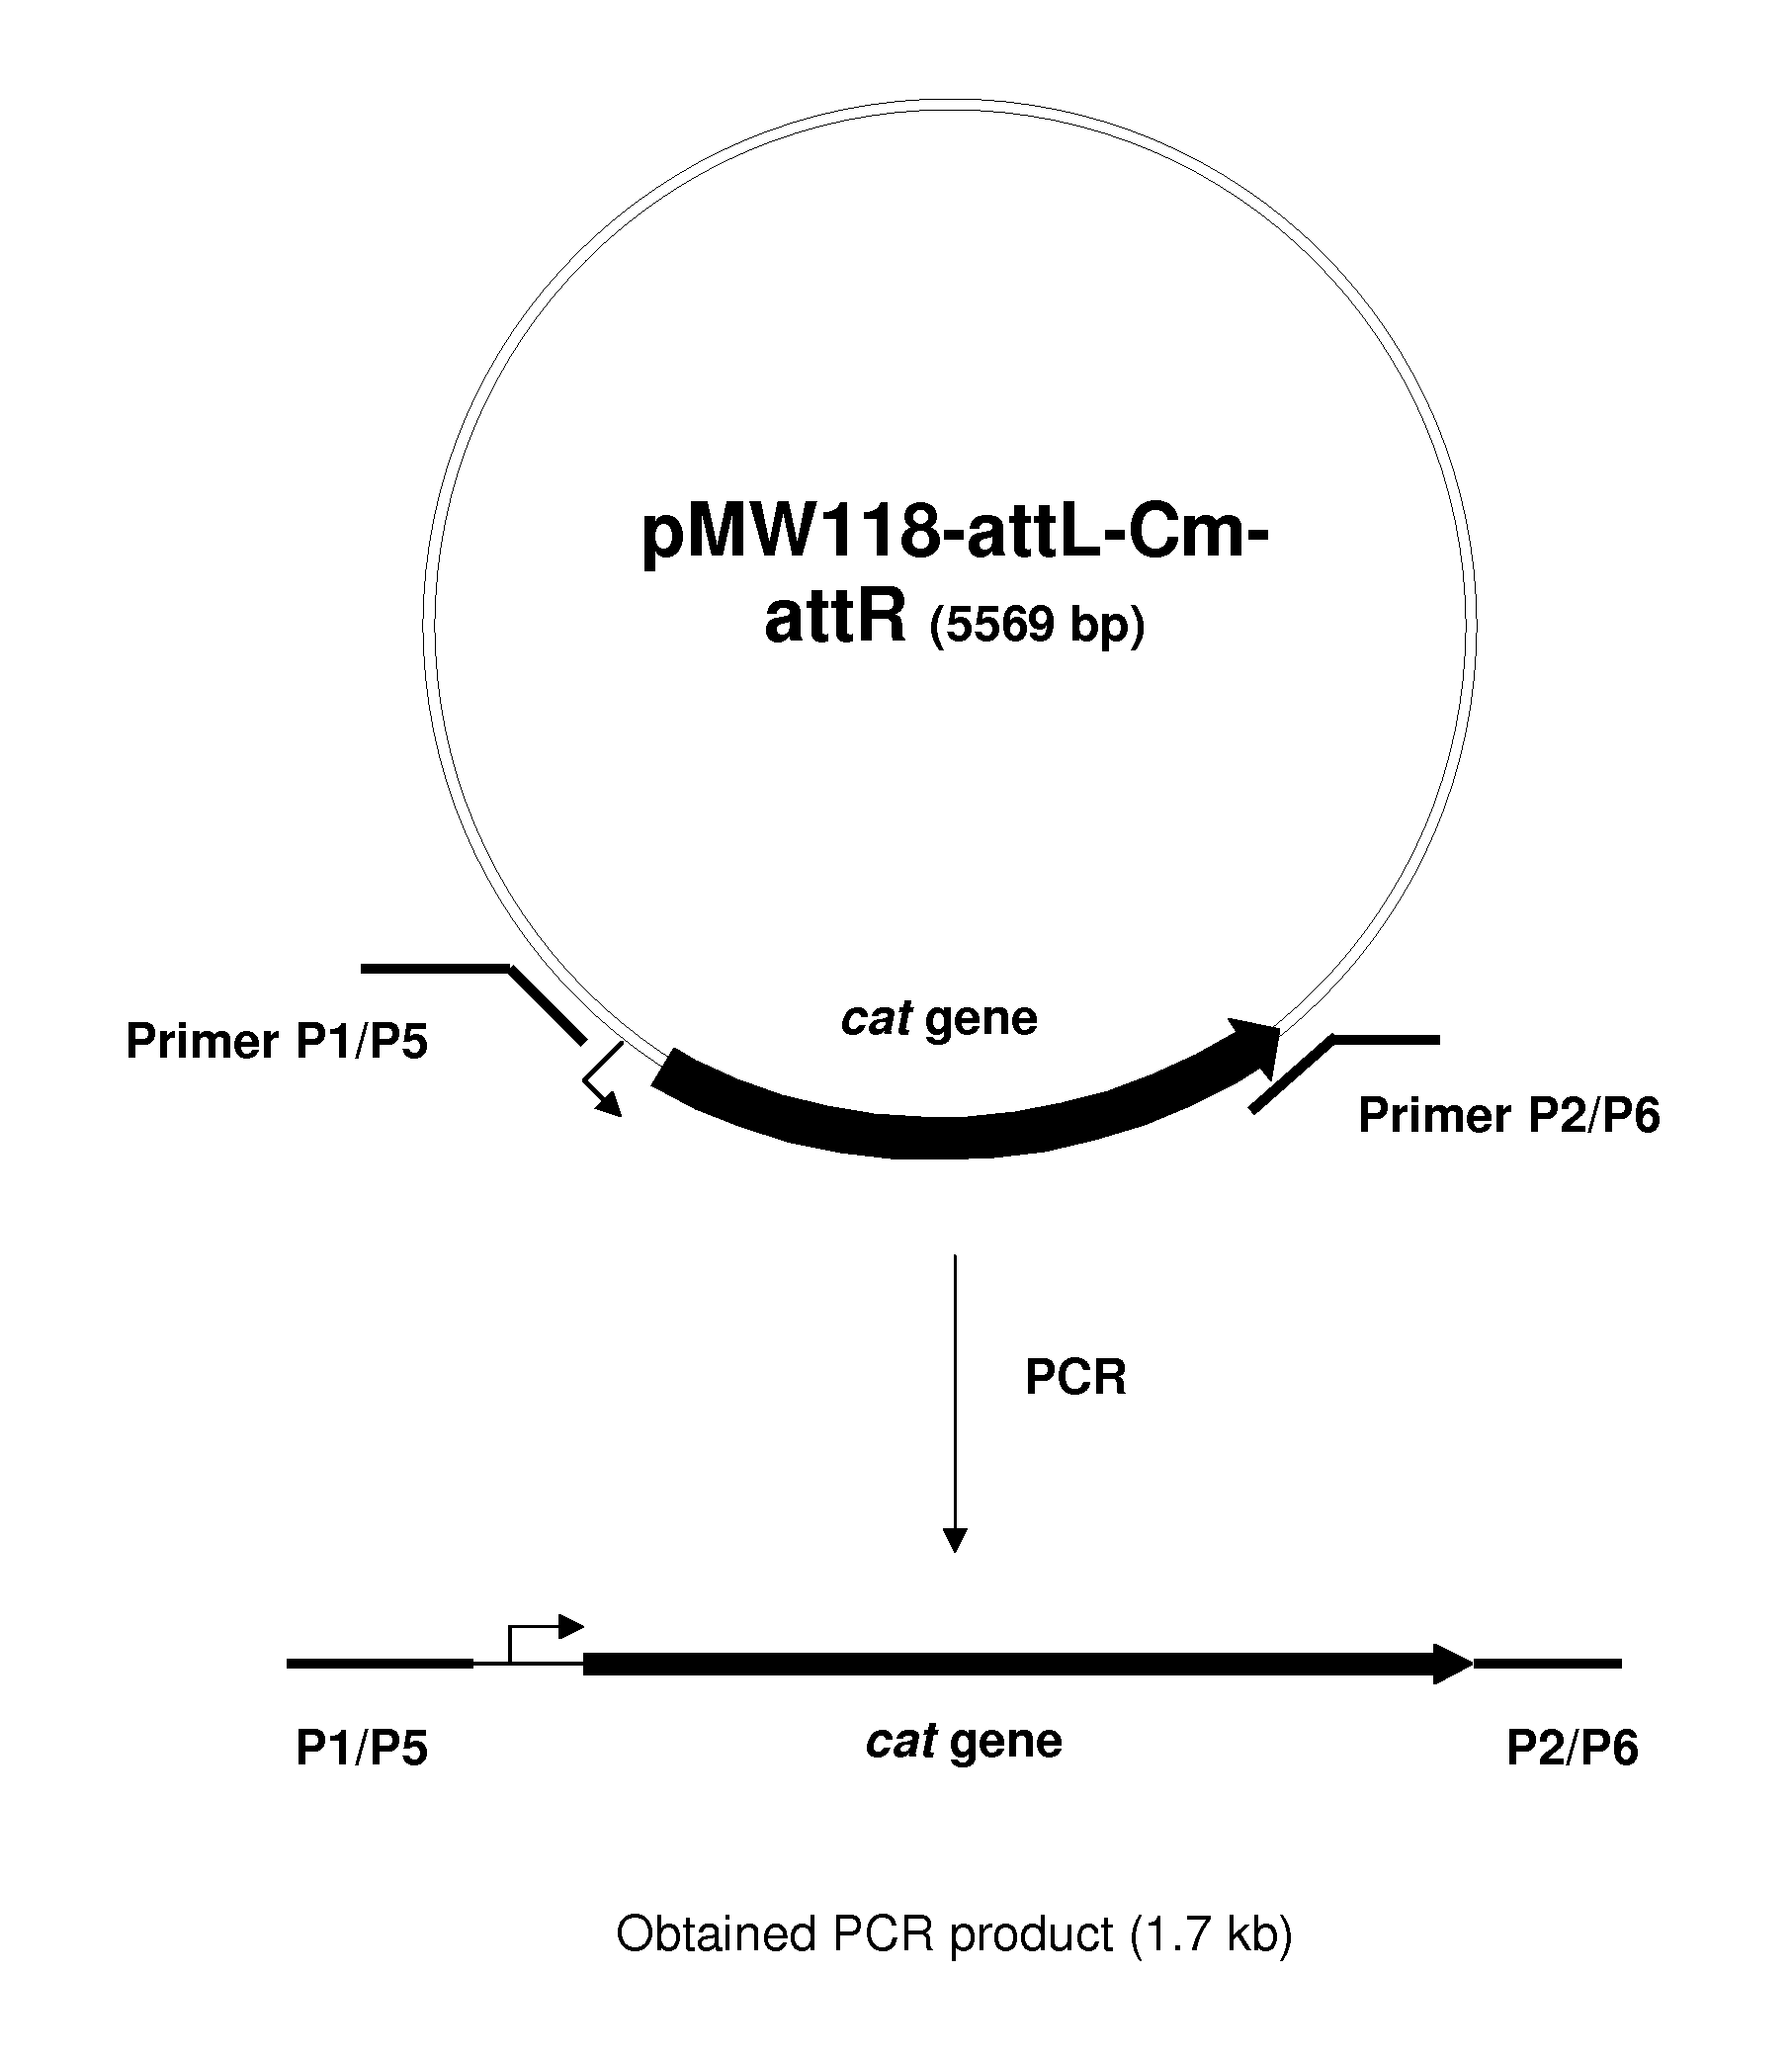 Method for producing l-arginine using a bacterium of enterobacteriaceae family, having attenuated expression of a gene encoding an l-arginine transporter